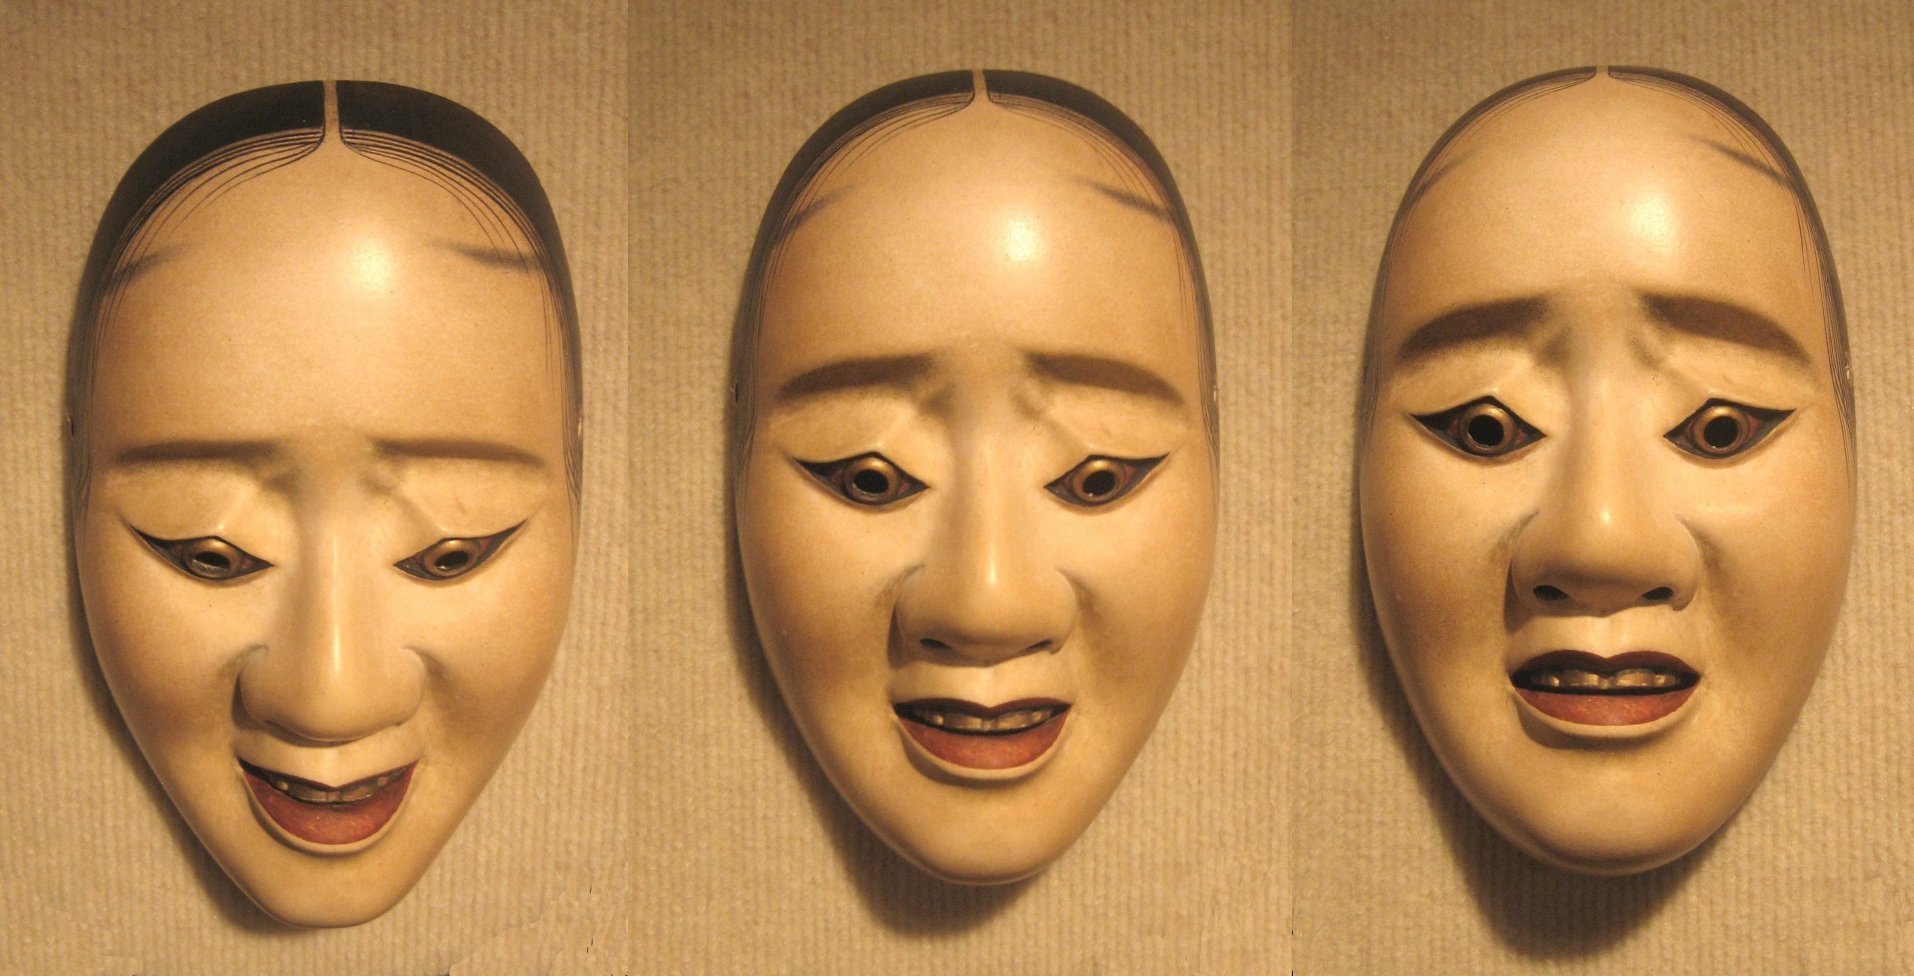 Figure 2. Noh mask shown from three angles